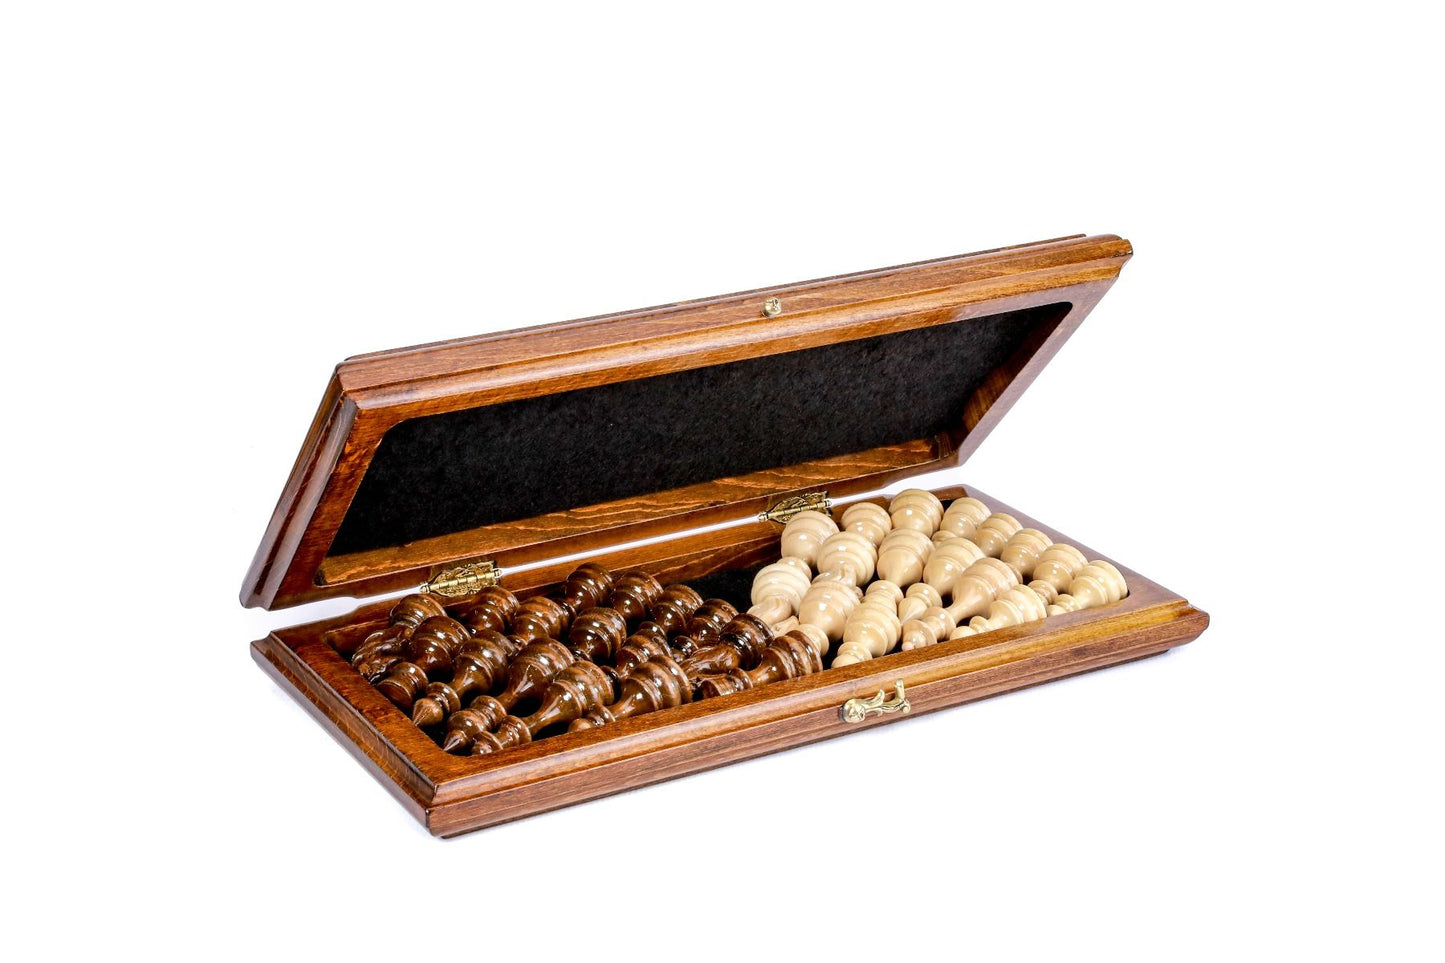 Celebrate the fusion of tradition and craftsmanship with a chess set that offers a fresh take on the timeless game, crafted from beautiful wood.